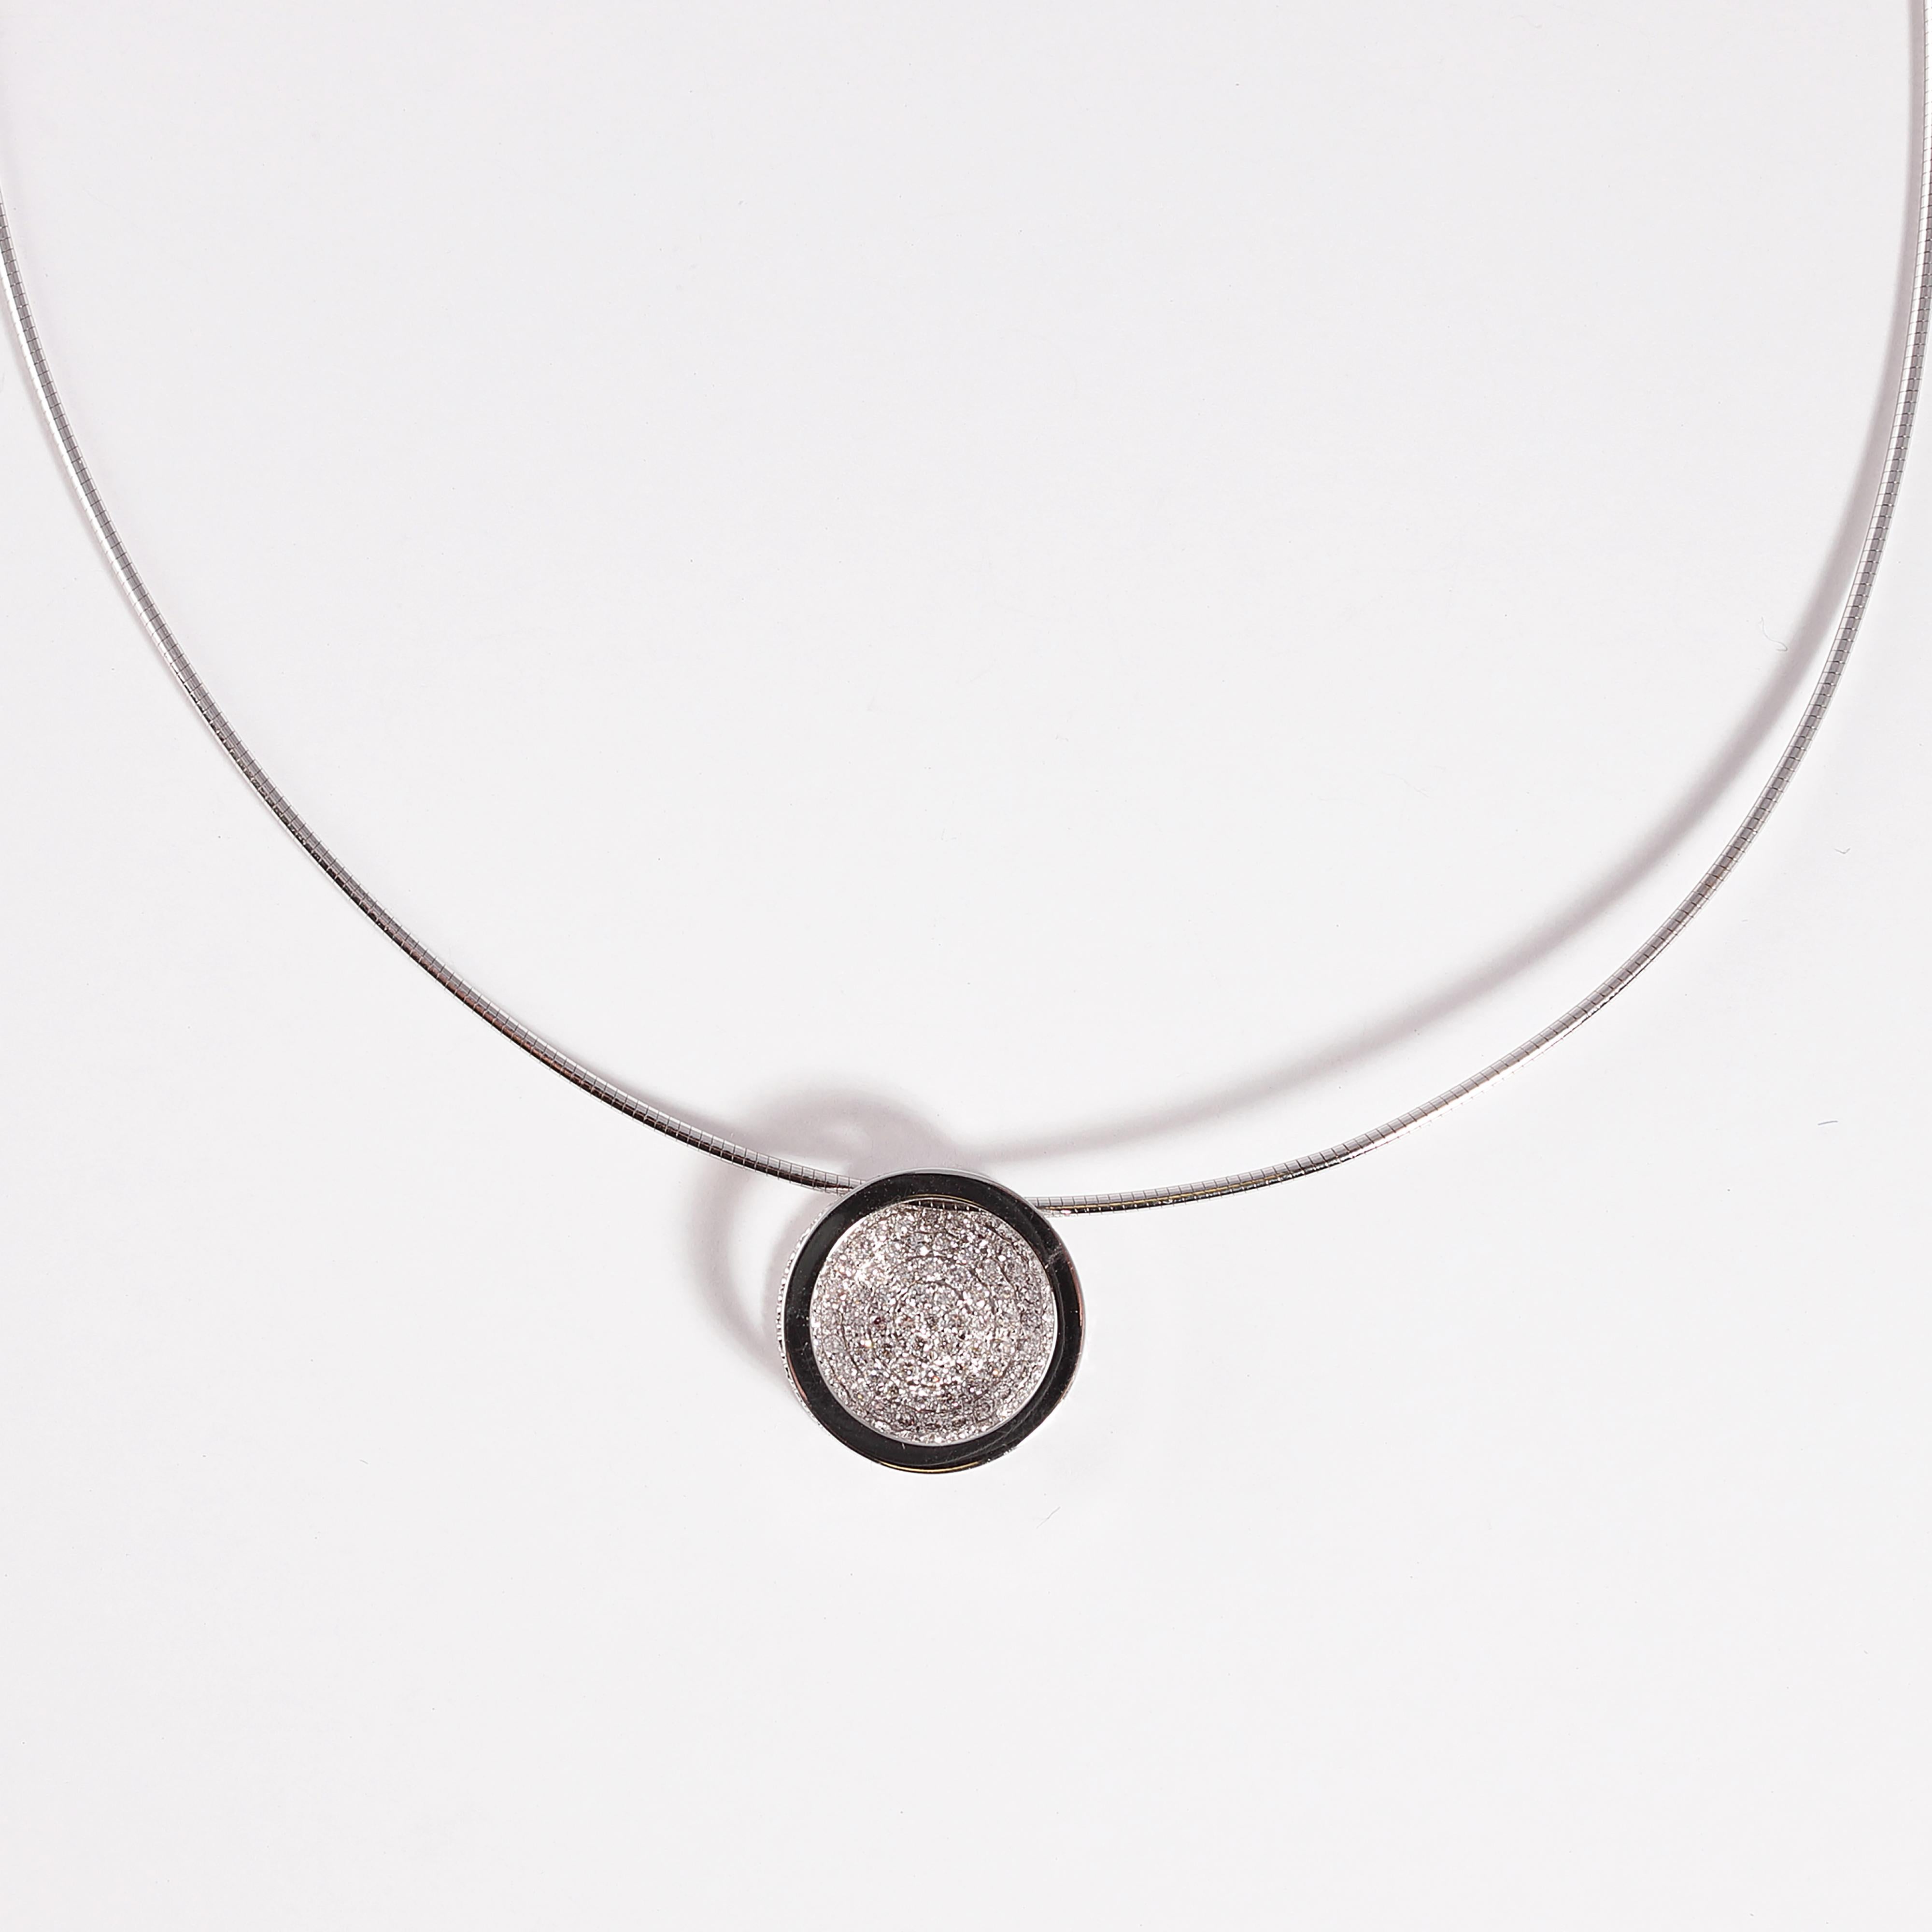 This 18 karat, white gold, circular pendant is suspended from an 18 karat white gold, snake chain, measuring 16 inches in length.  The pendant supports pave set diamonds with a total stated weight of 0.60 carats. 